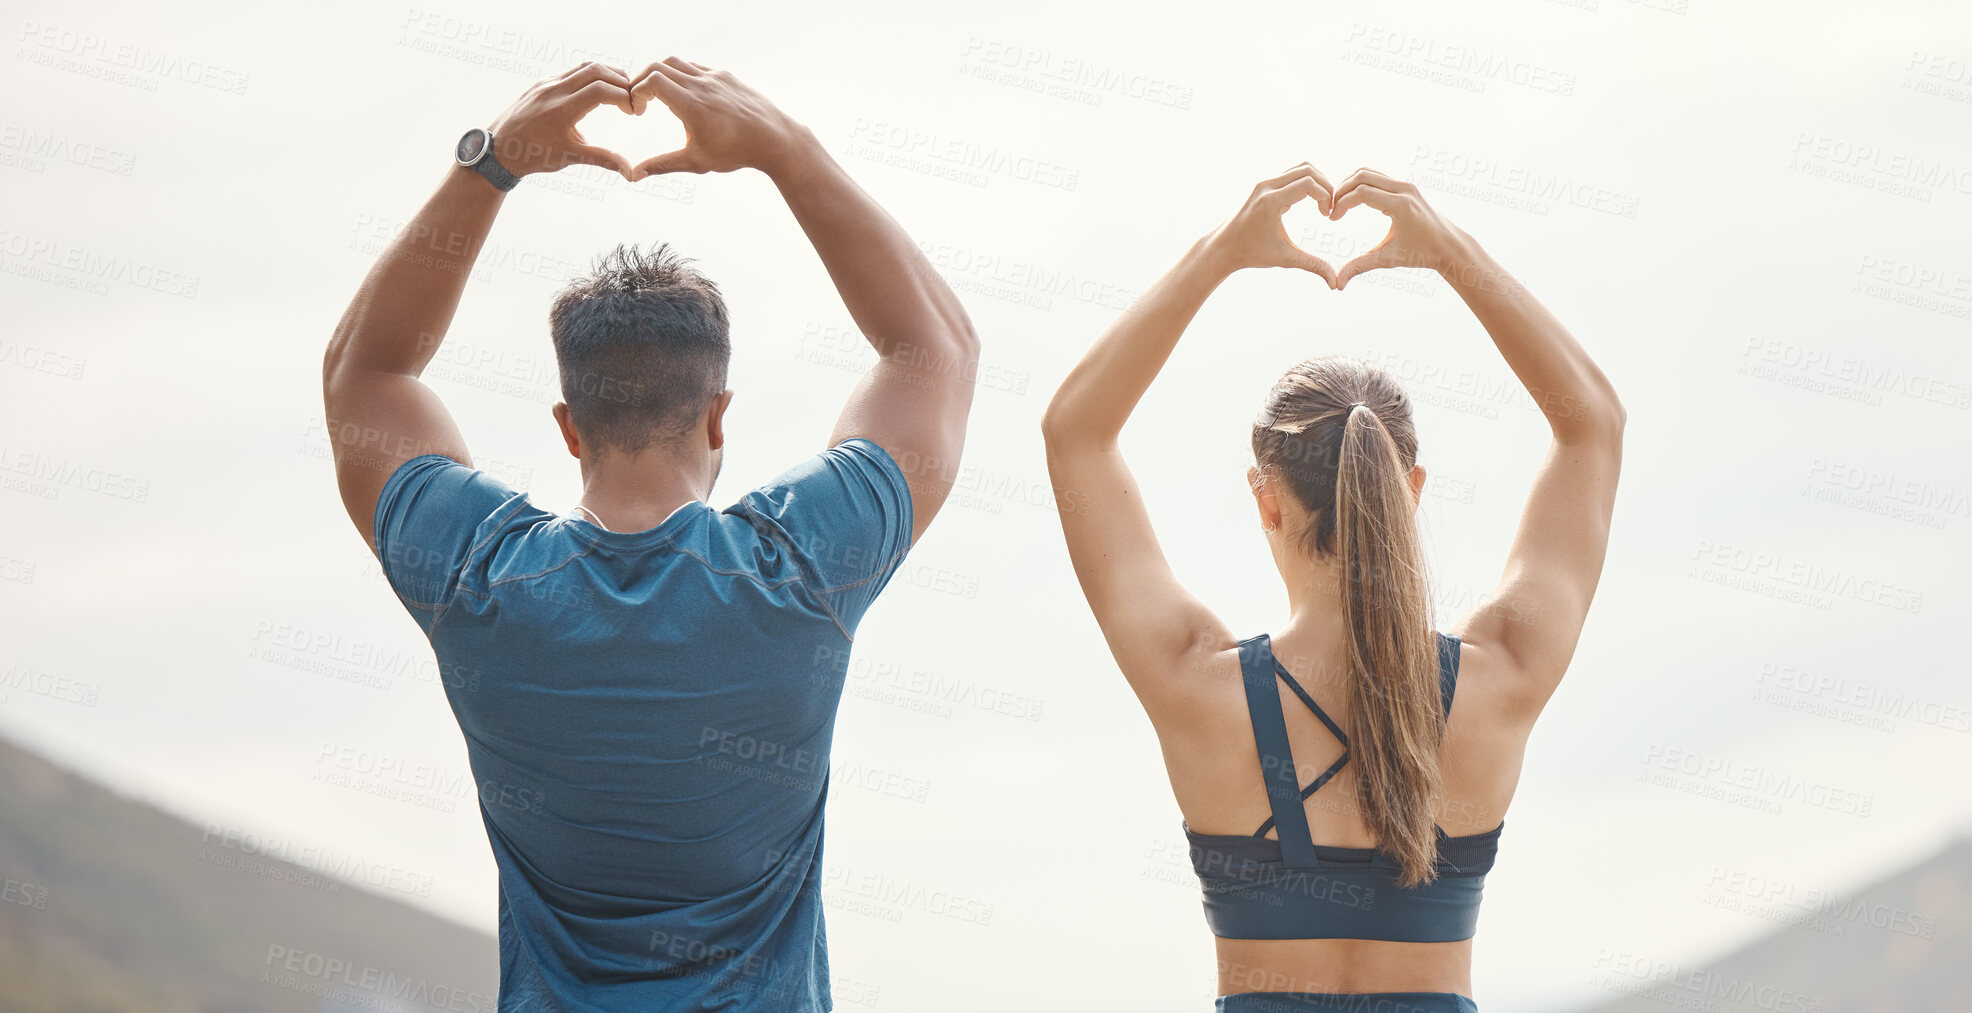 Buy stock photo Fit young man and woman from the back gesturing heart shapes with hands while exercising together outdoors. Two athletes caring for body with regular training workout or run. Endorsing and loving a healthy active lifestyle